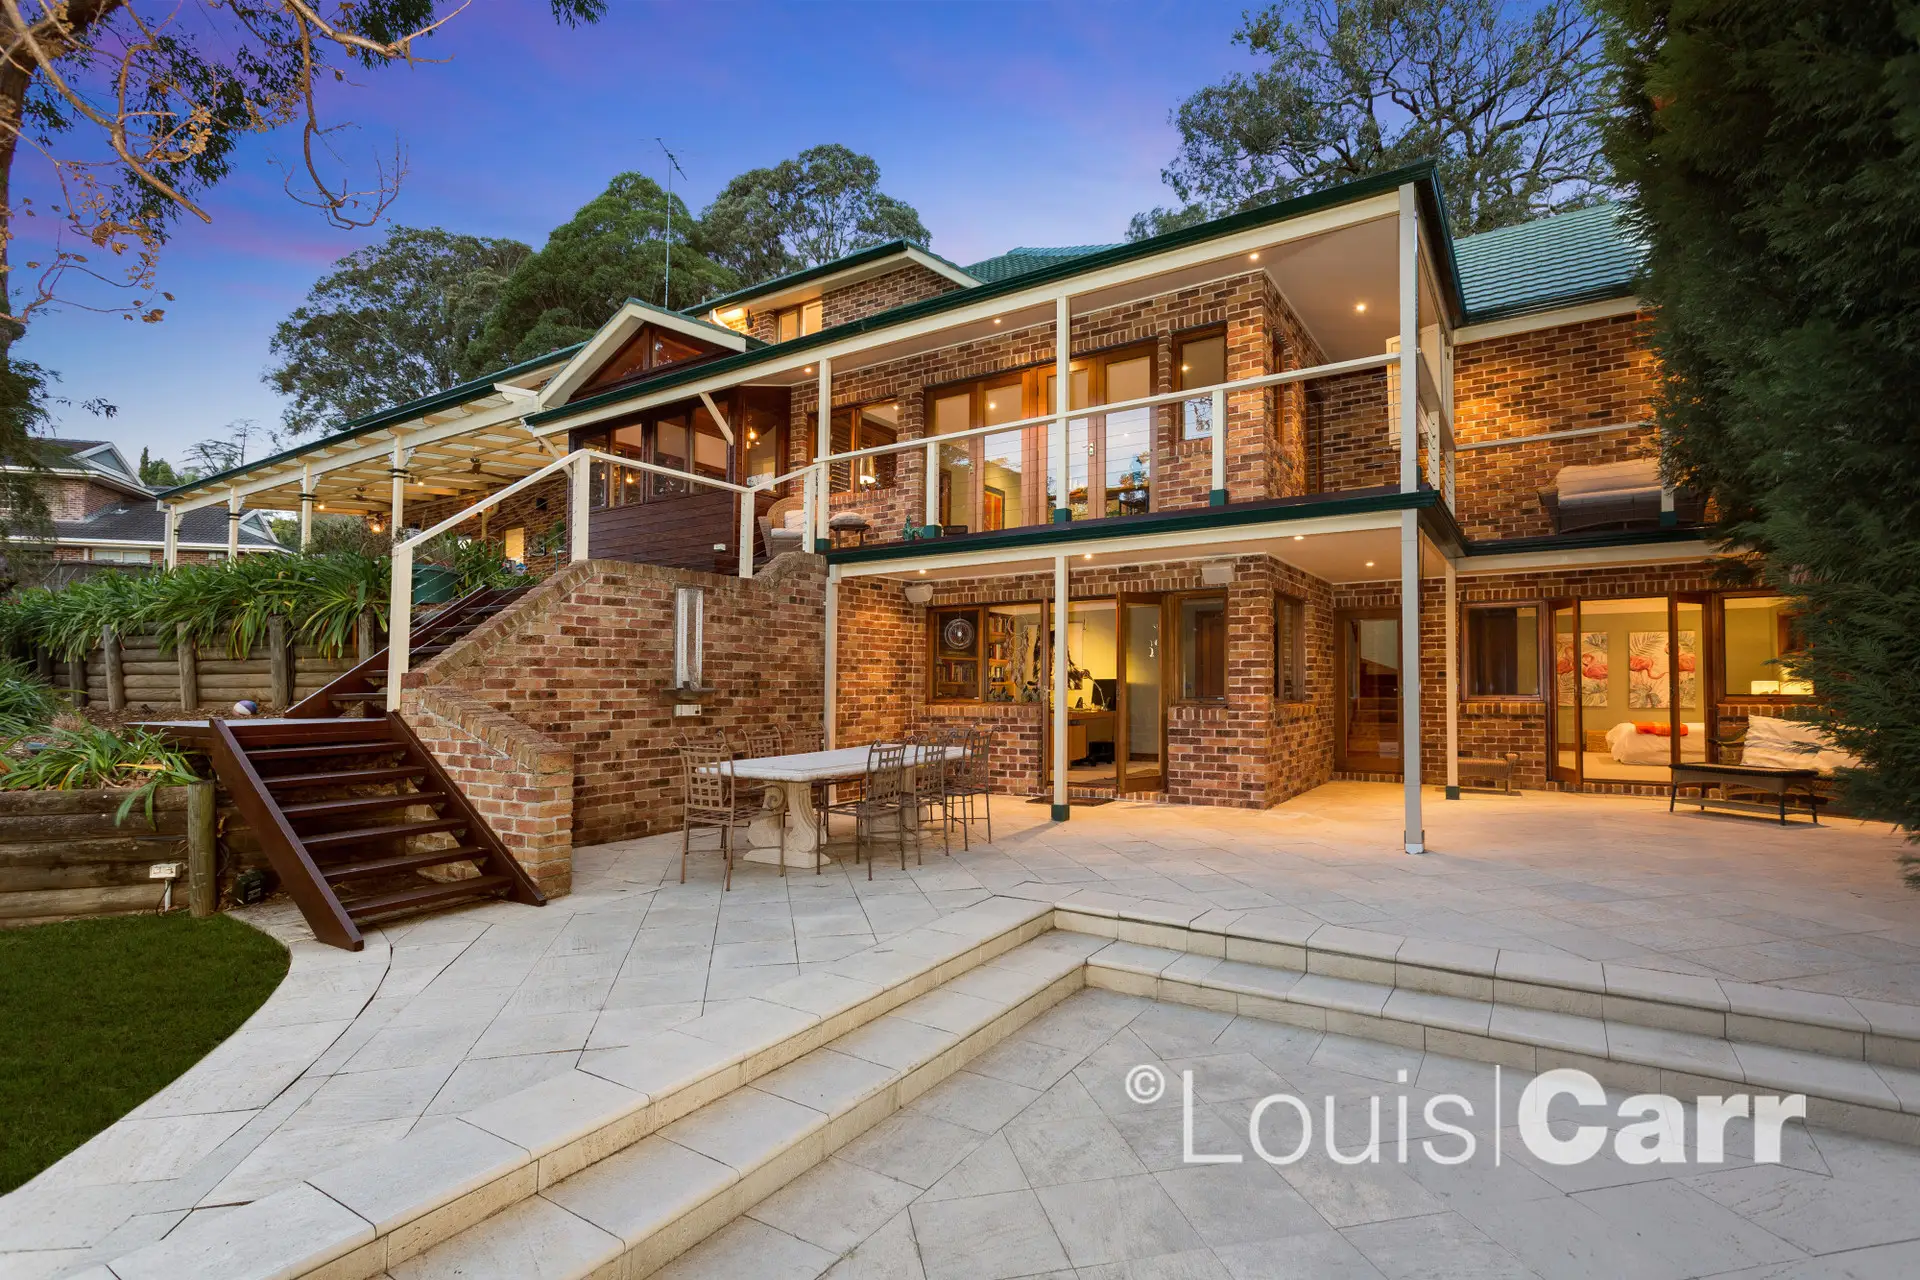 Photo #18: 16 Crego Road, Glenhaven - Sold by Louis Carr Real Estate